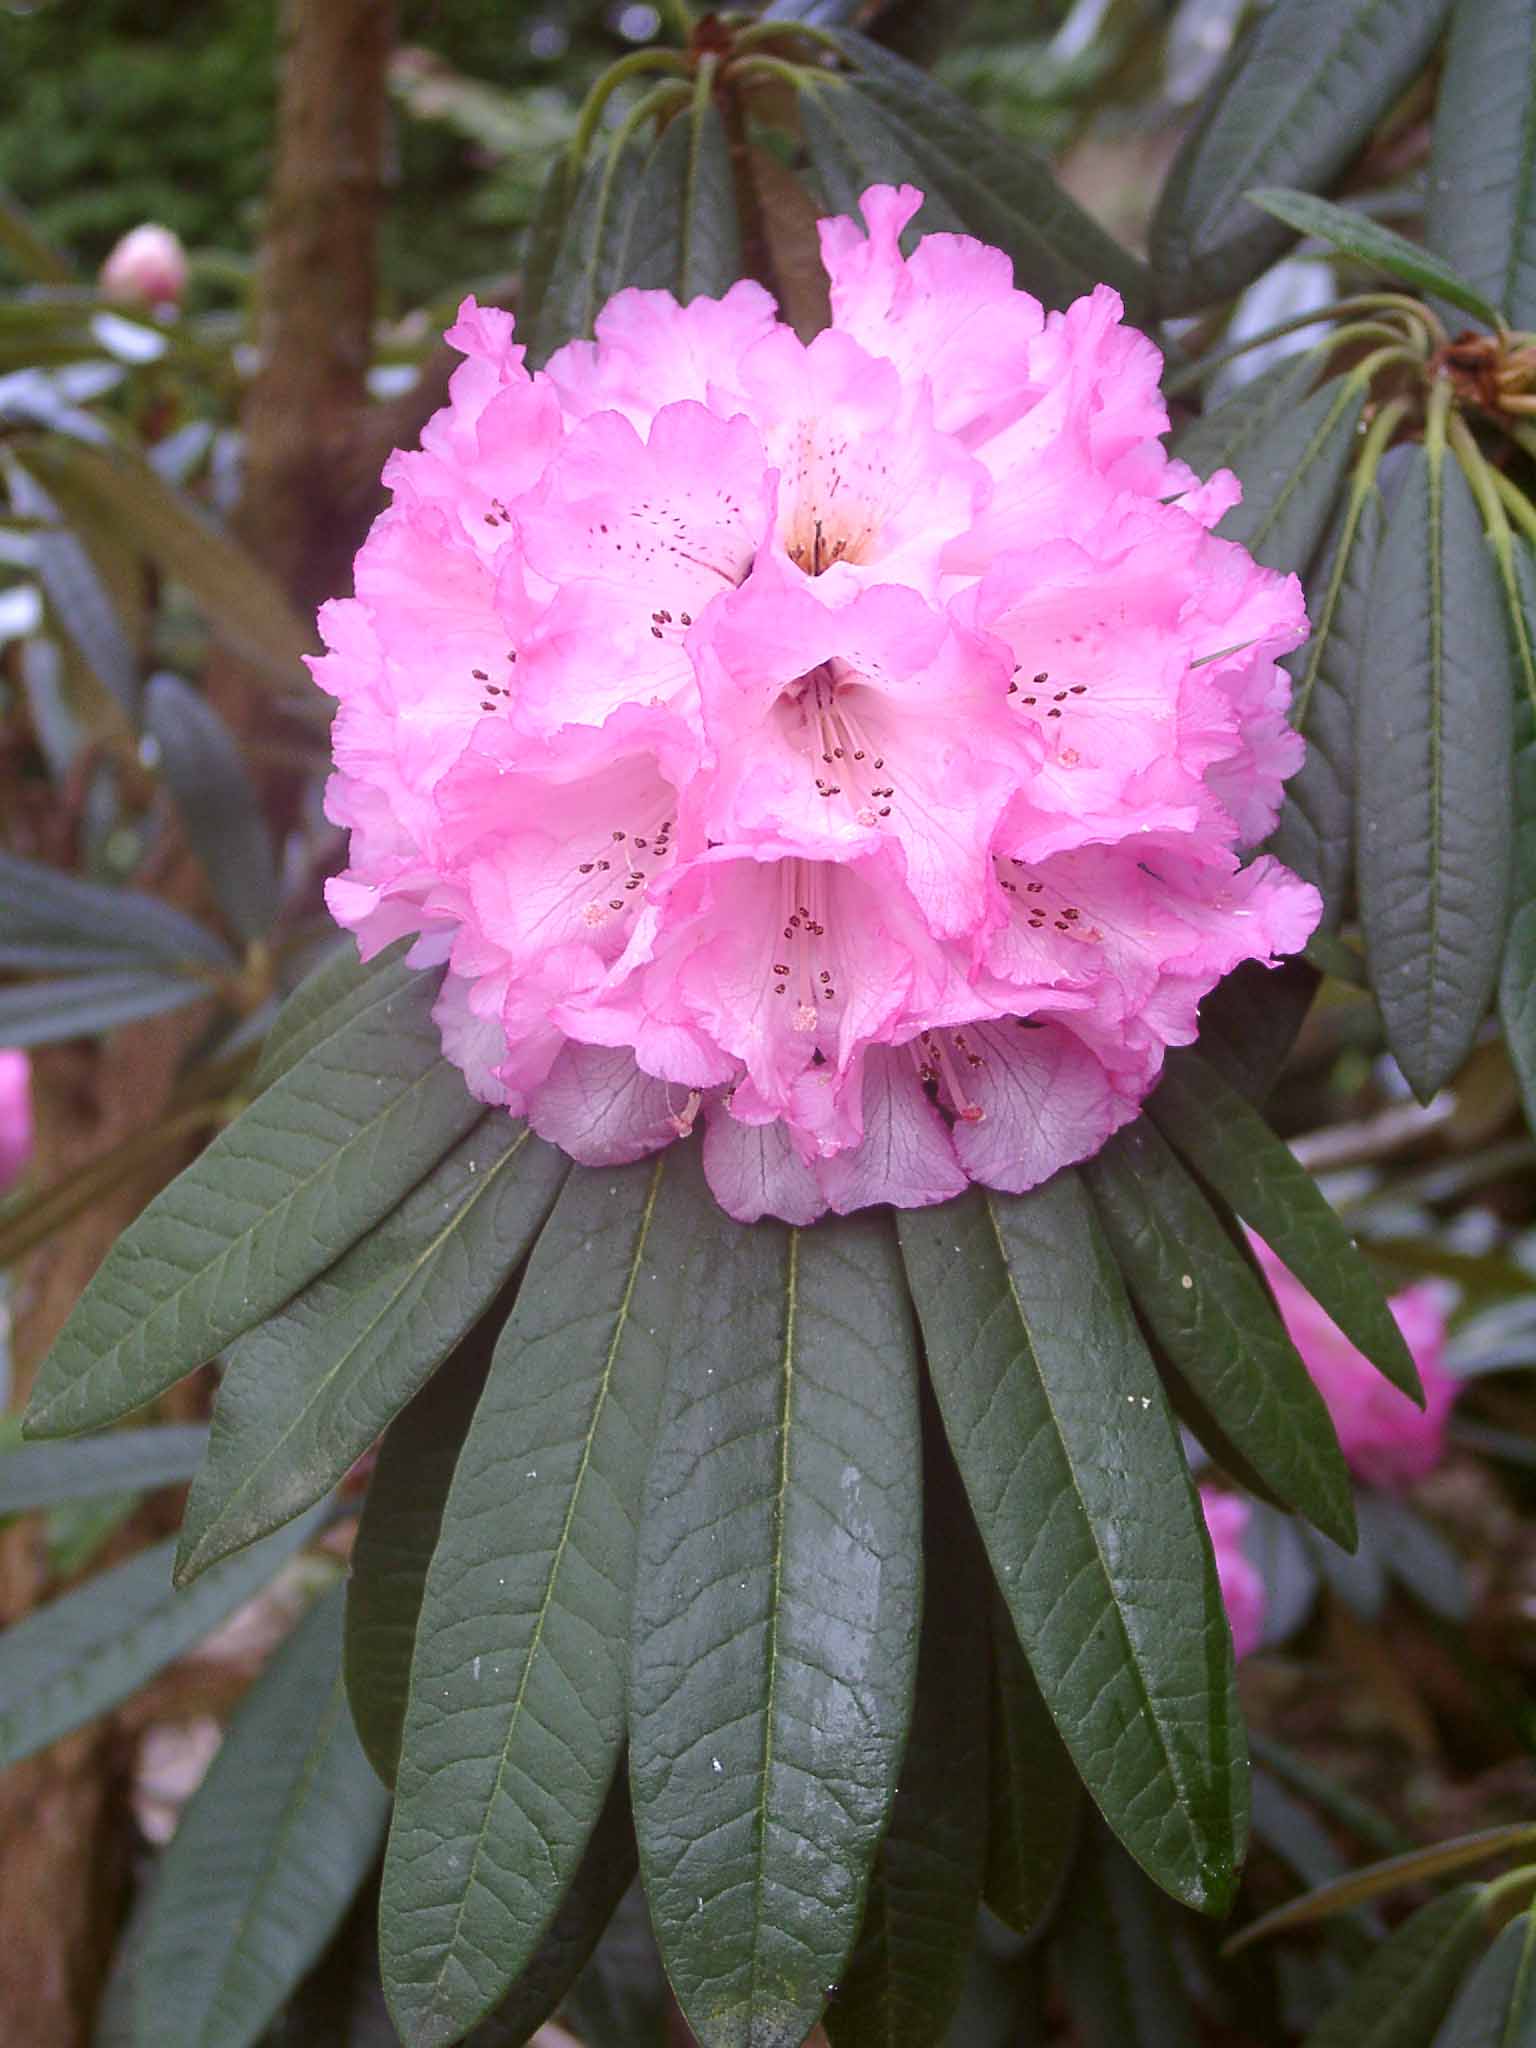 ARBOREUM ROSEUM Rhododendron Larger Species Rhododendrons